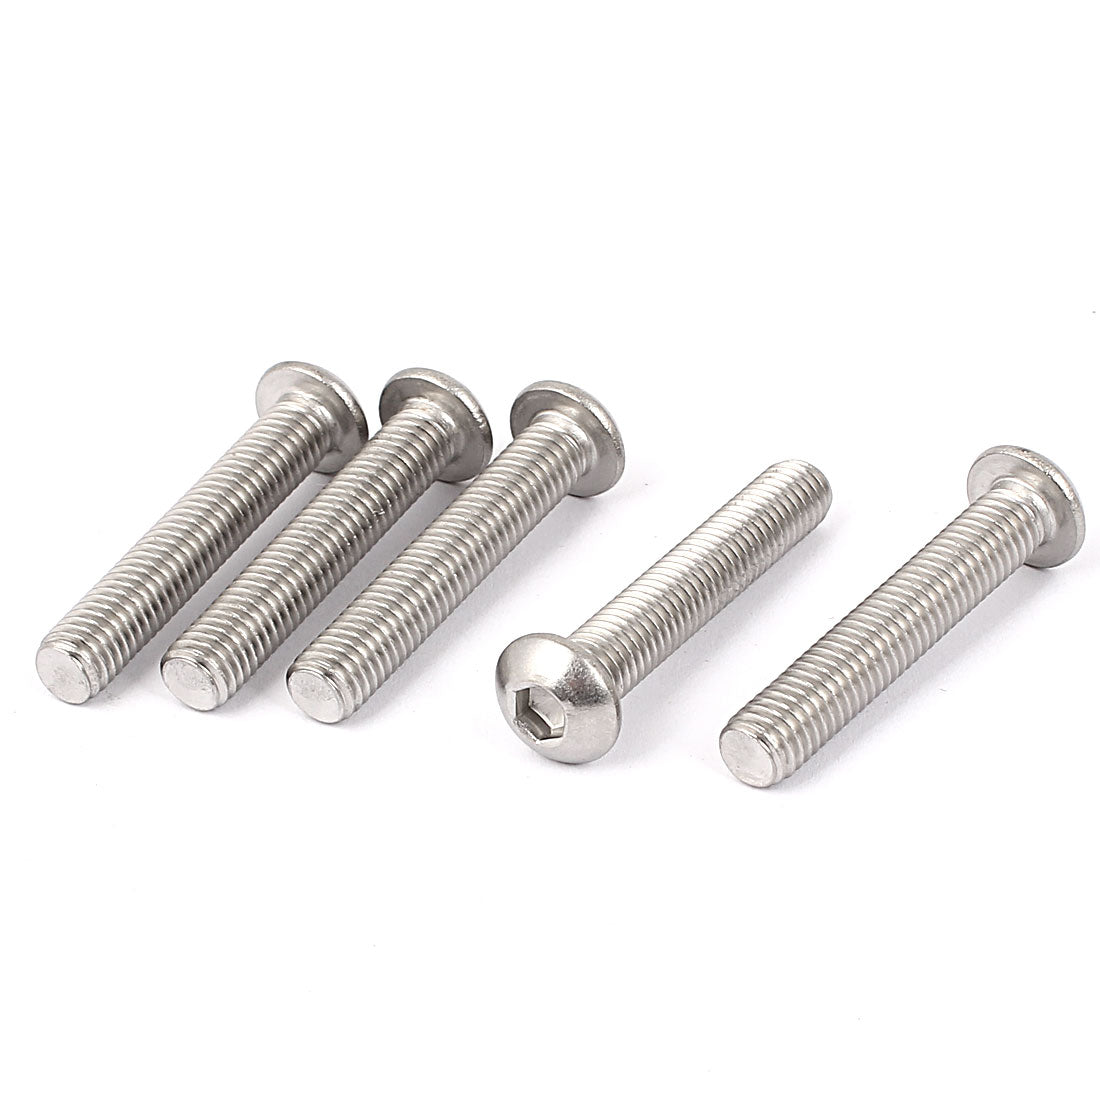 Uxcell Uxcell M8 x 45mm Stainless Steel Button Head Socket Cap Screw Silver Tone 5 Pcs